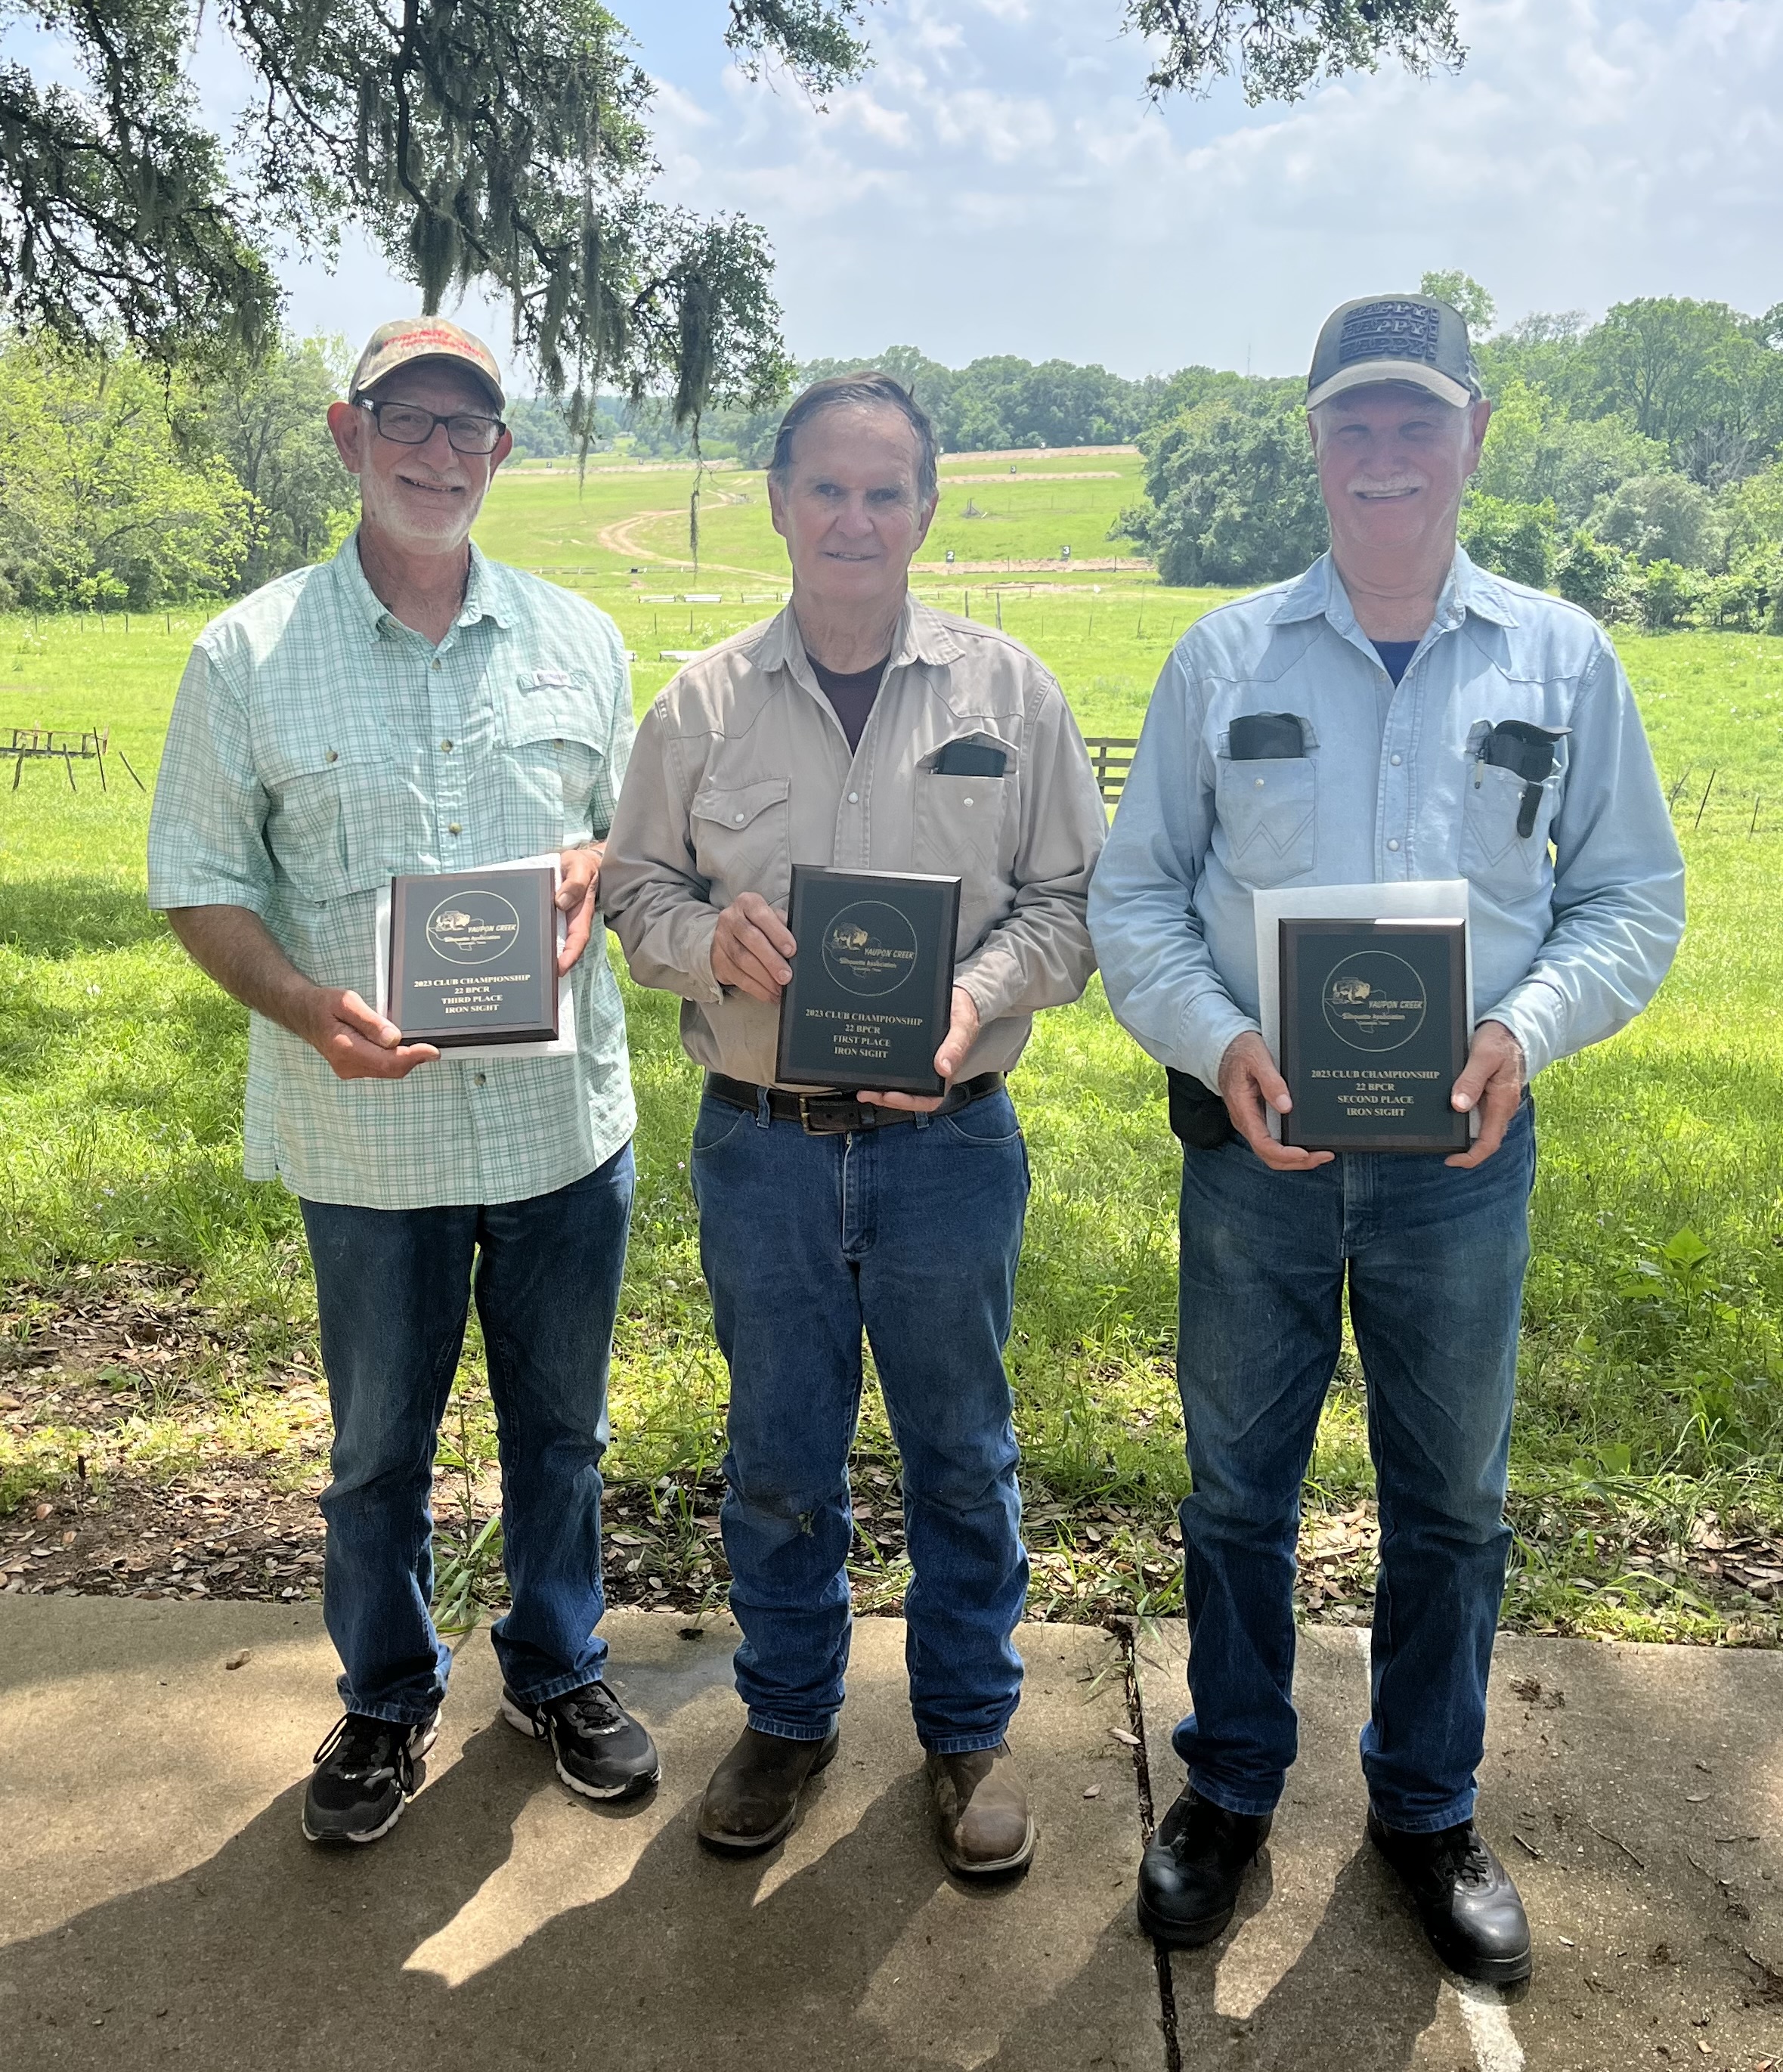 Center: Charlie Schroeder took 1st place in the Iron Sight class with a 41. Right: LeRoy Tanner took 2nd with a 37. Left: Ed Story took the 3rd place award with a 36. Congratulations to our Iron Sight Class winners.